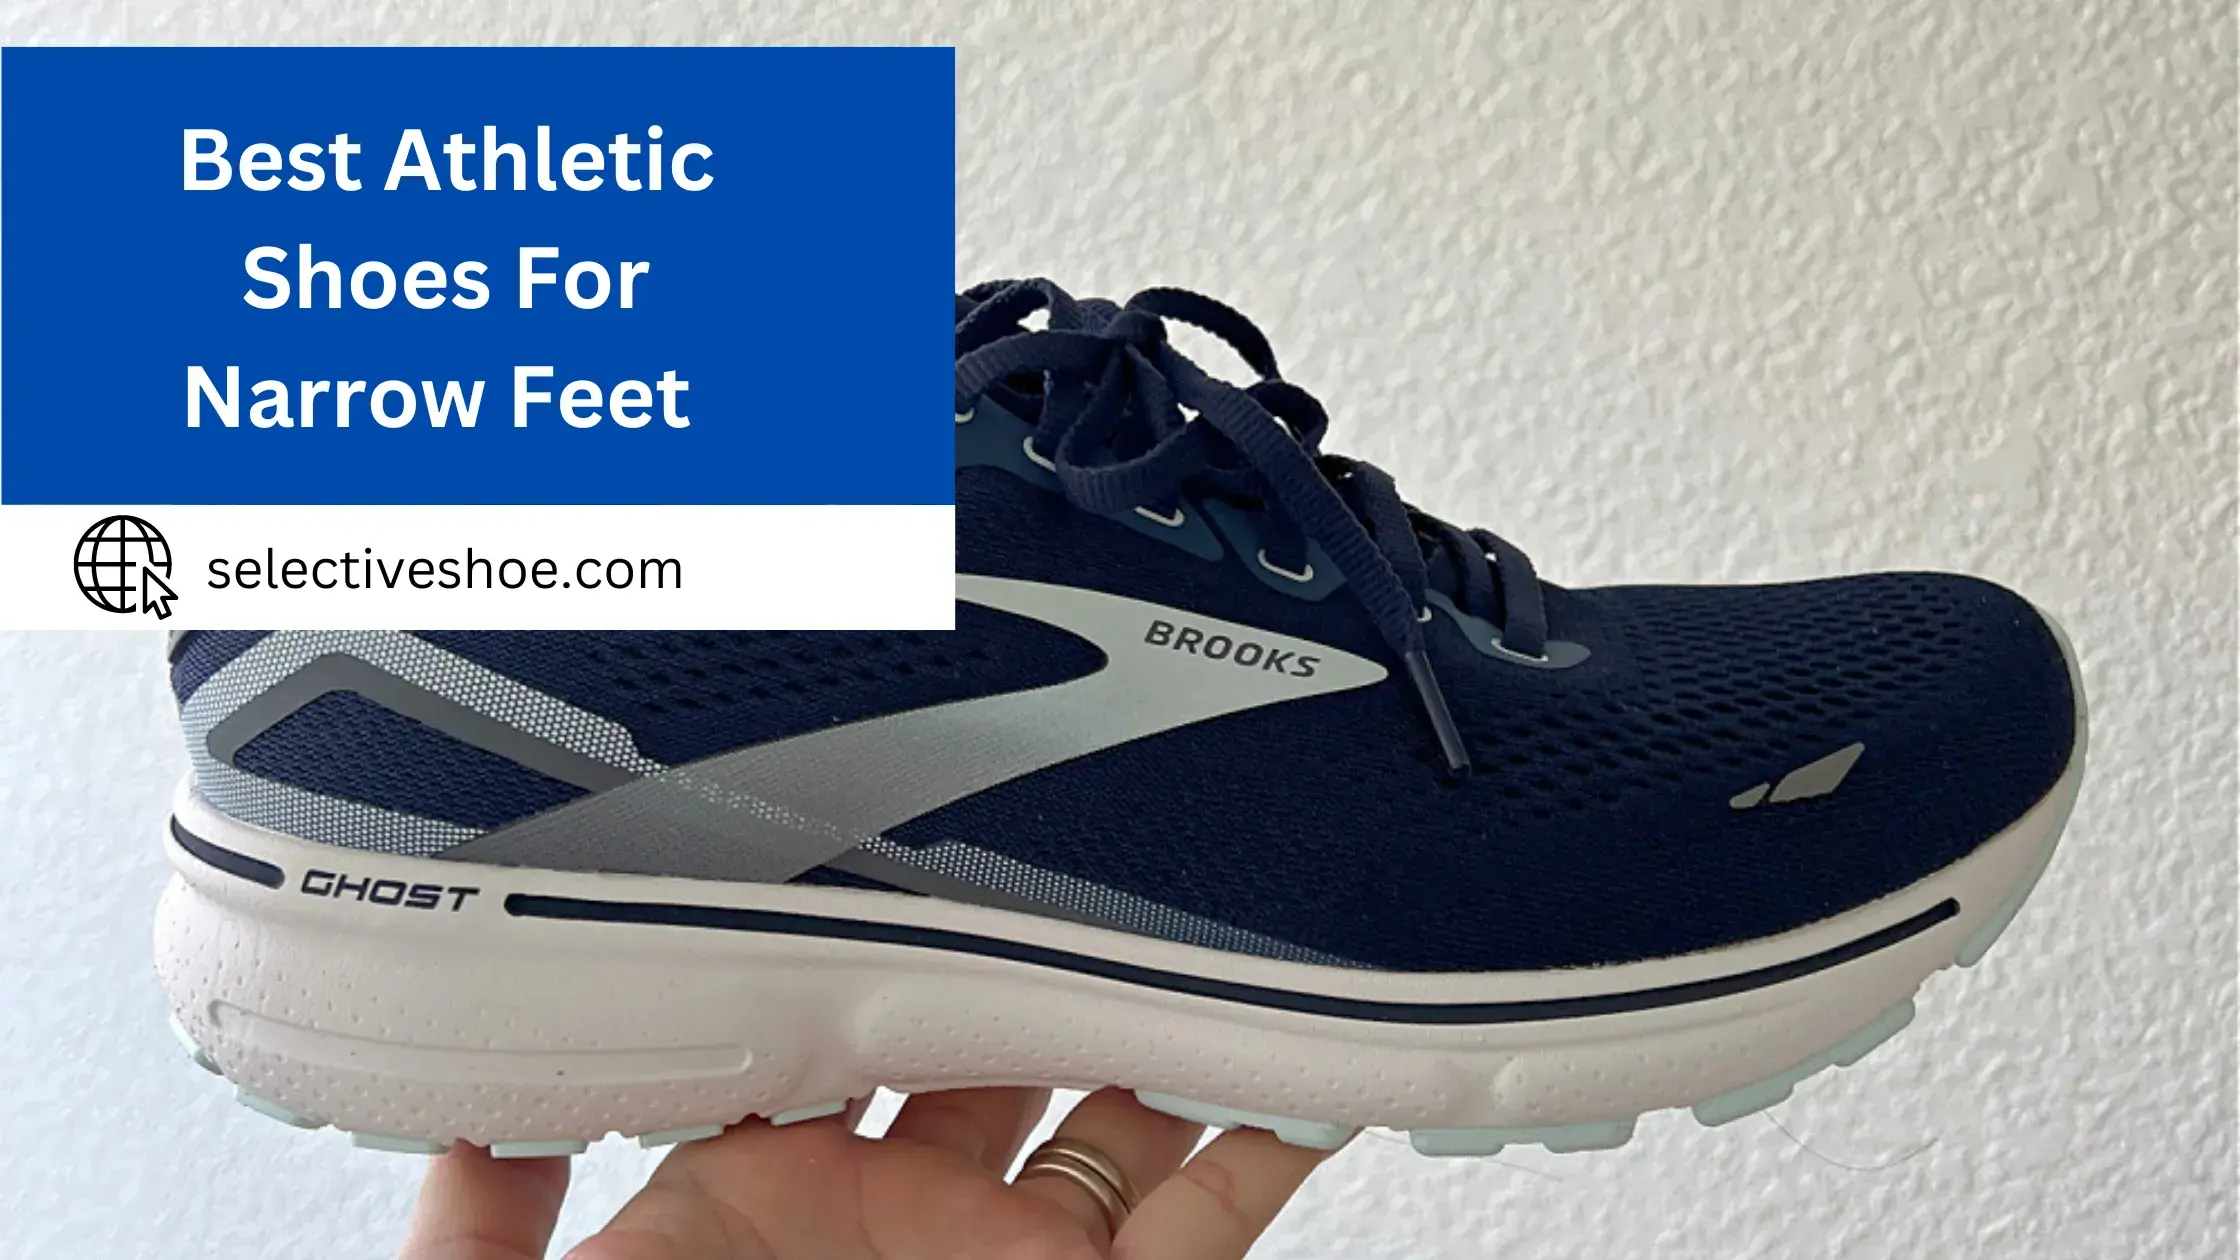 Best Athletic Shoes For Narrow Feet - (An In-Depth Guide)